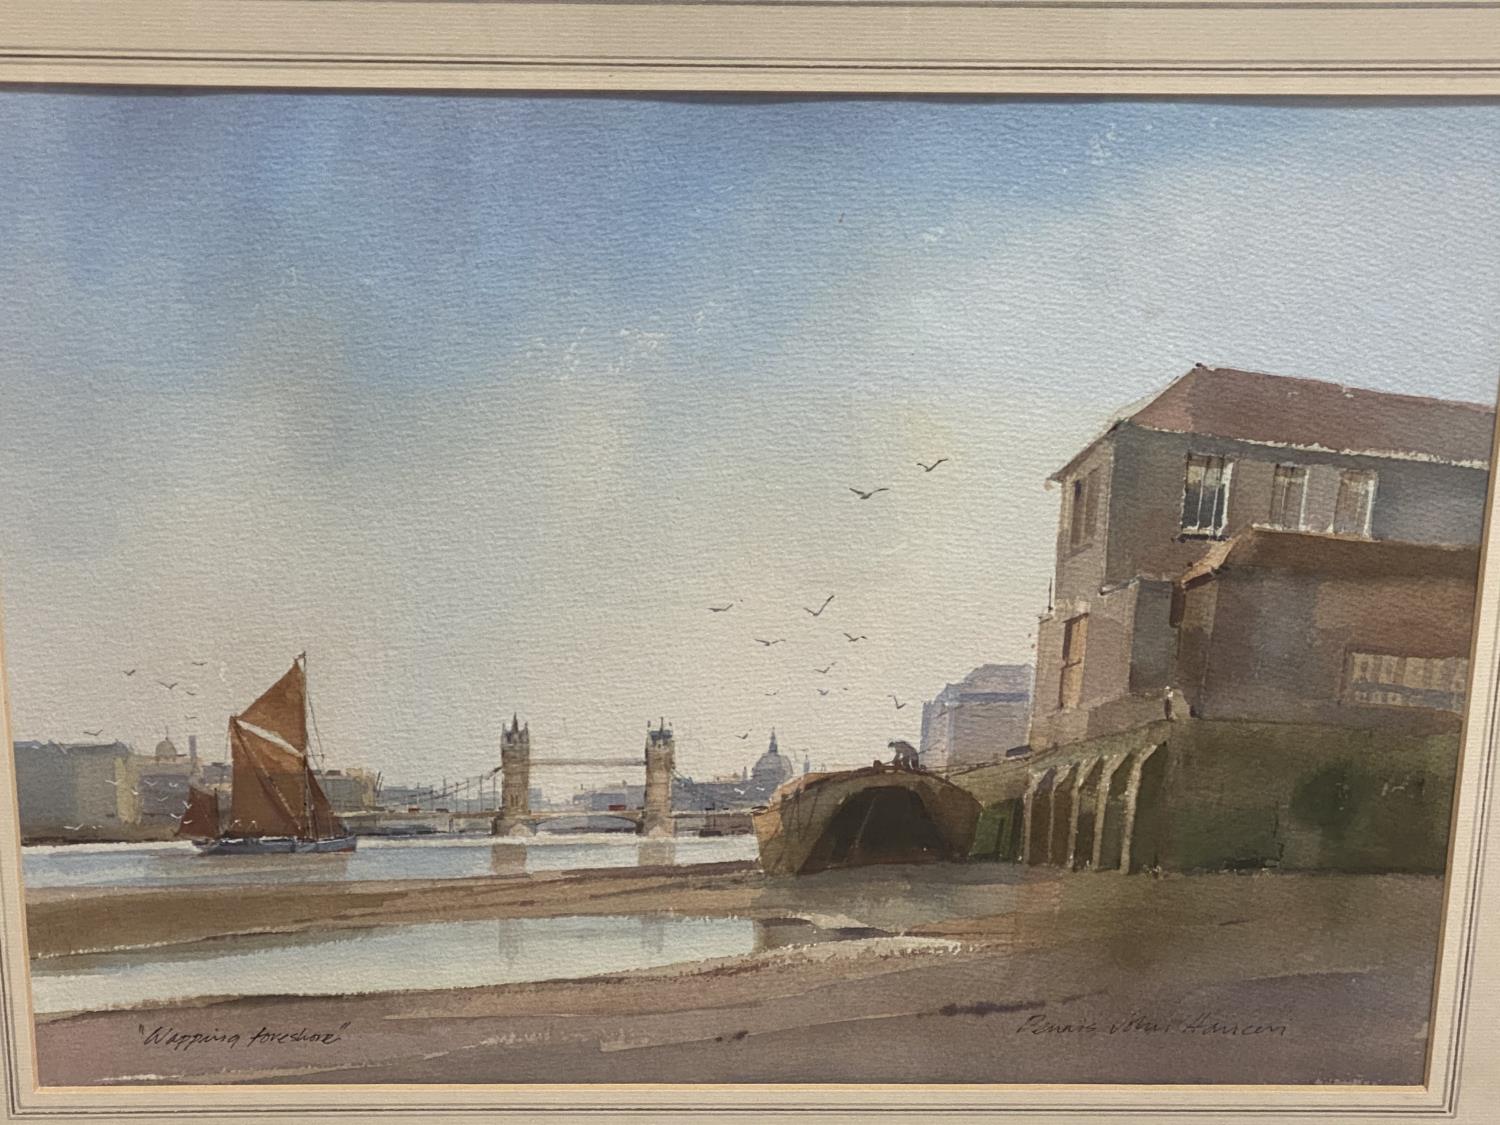 Dennis John Hanceri framed and glazed water colour "Wapping foreshore" and another watercolour of